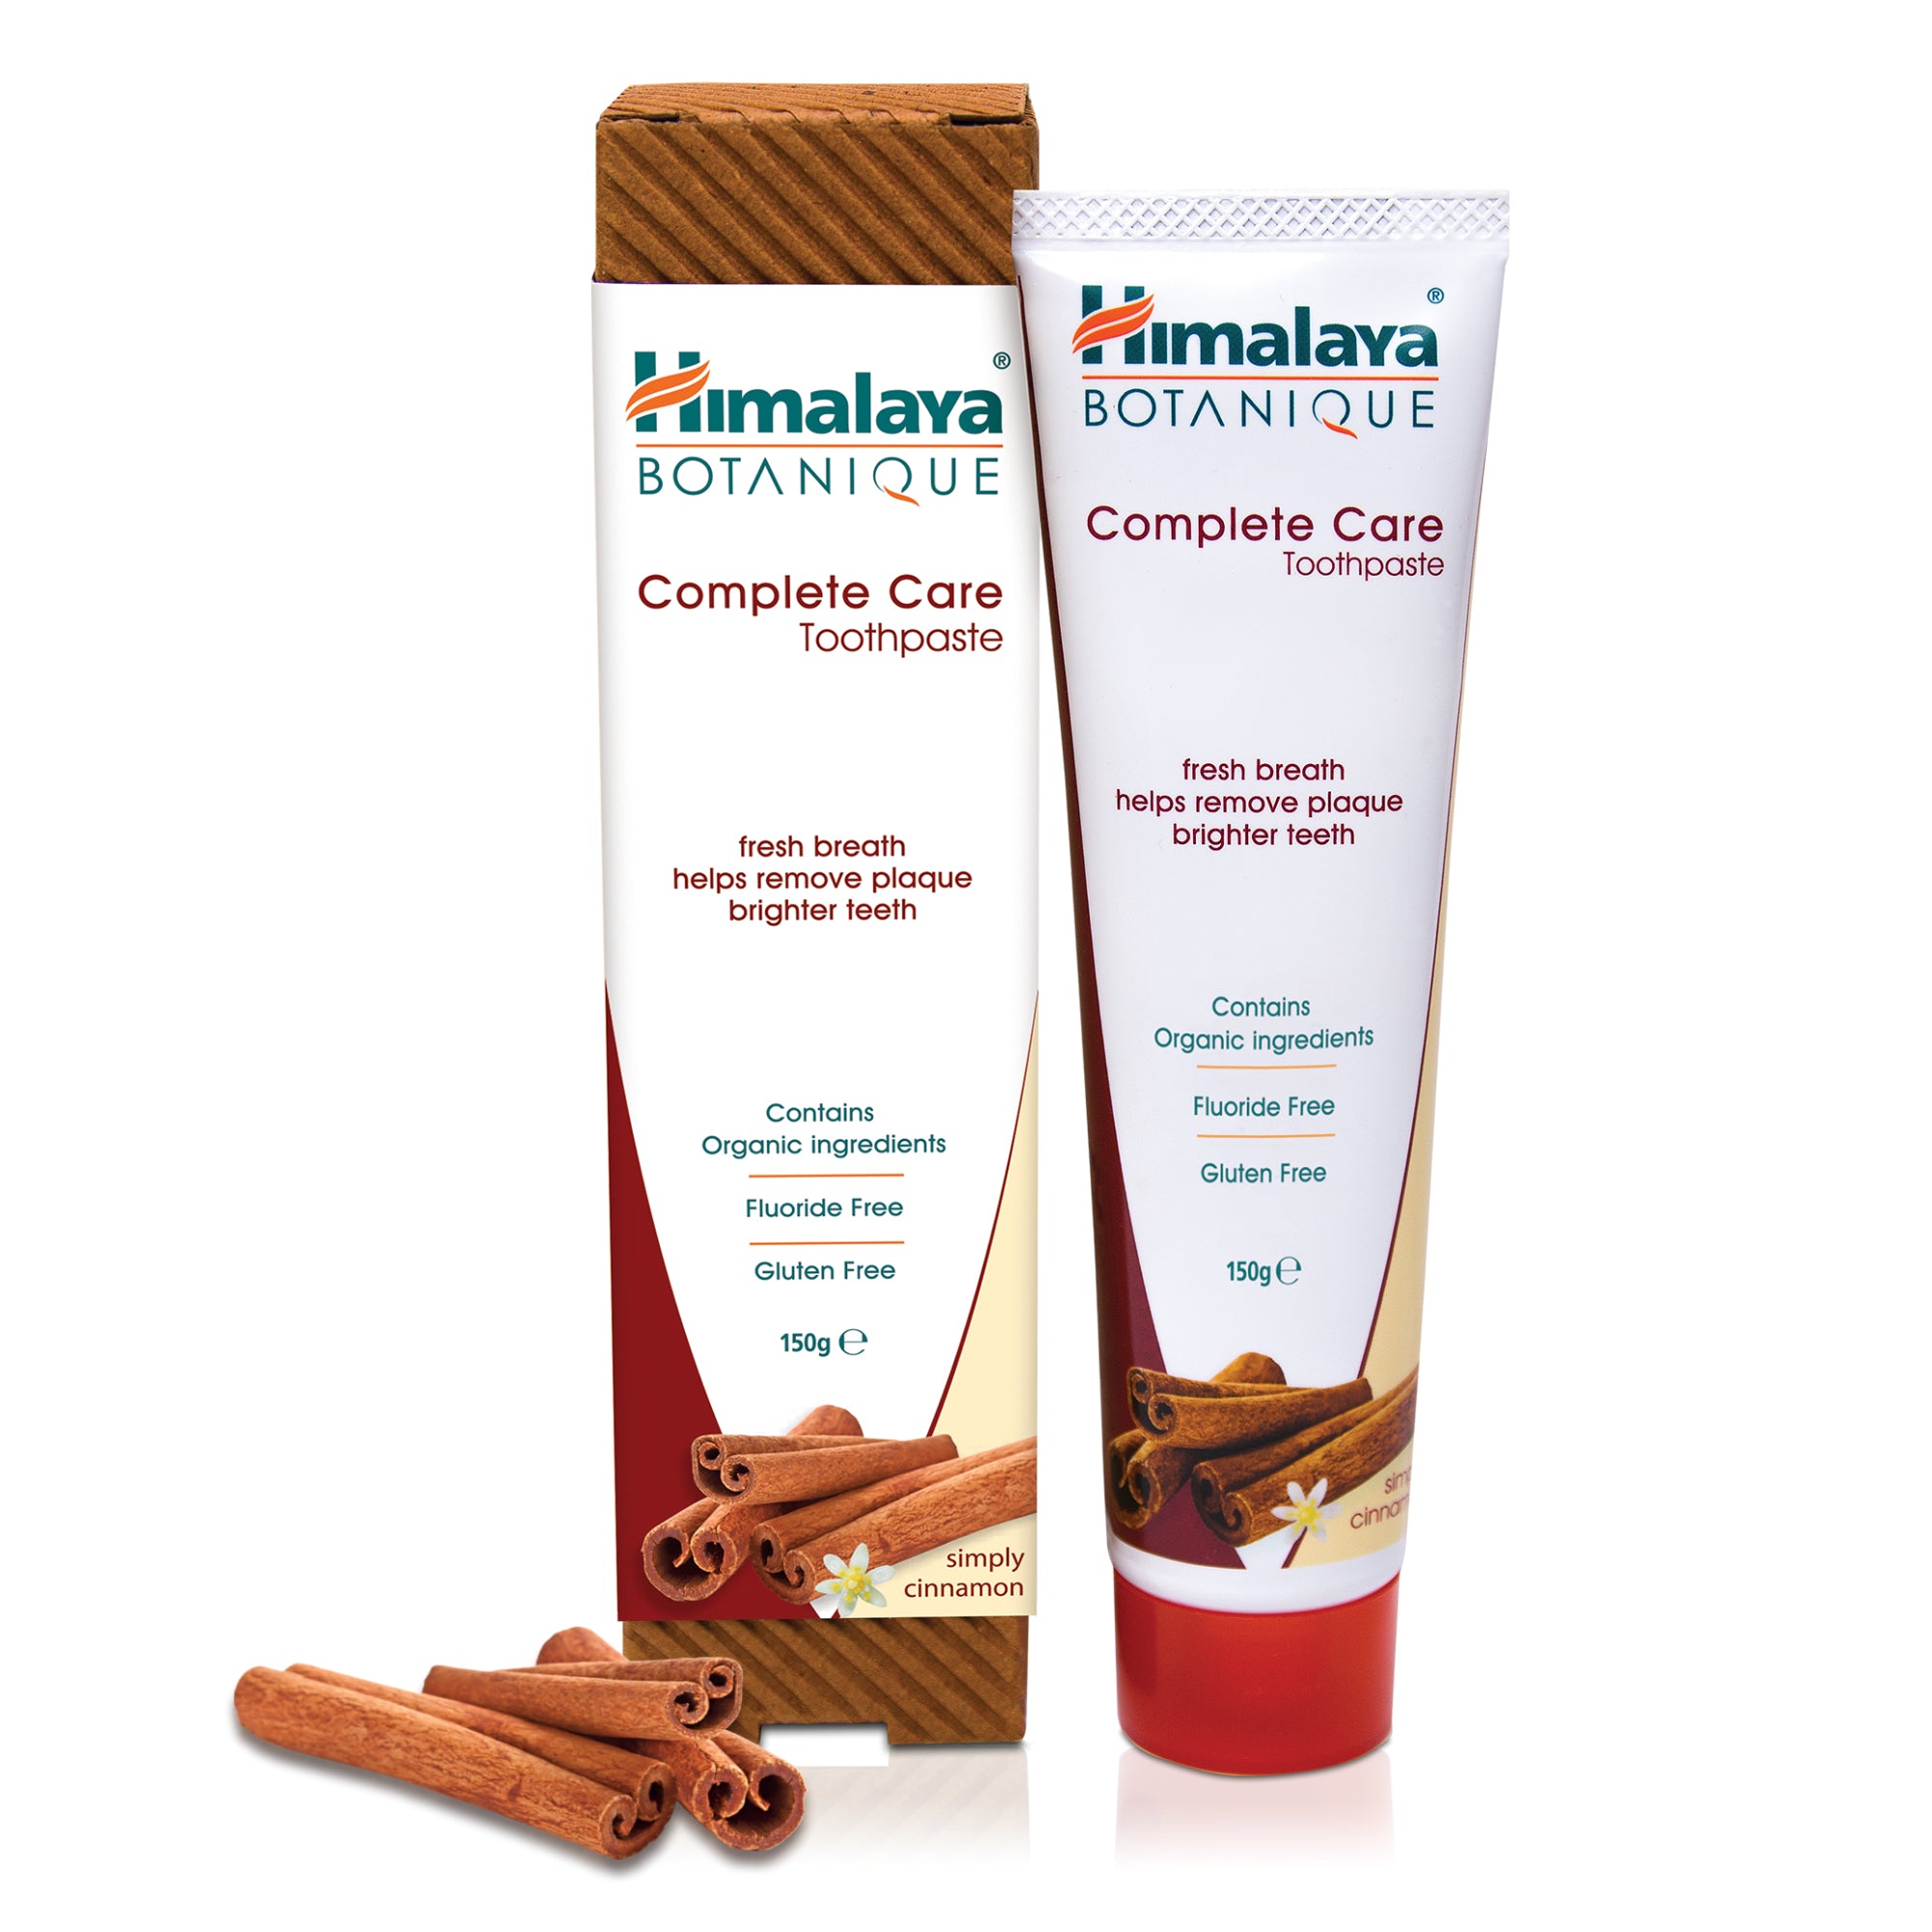 Himalaya BOTANIQUE Complete Care Toothpaste - Simply Cinnamon 150g